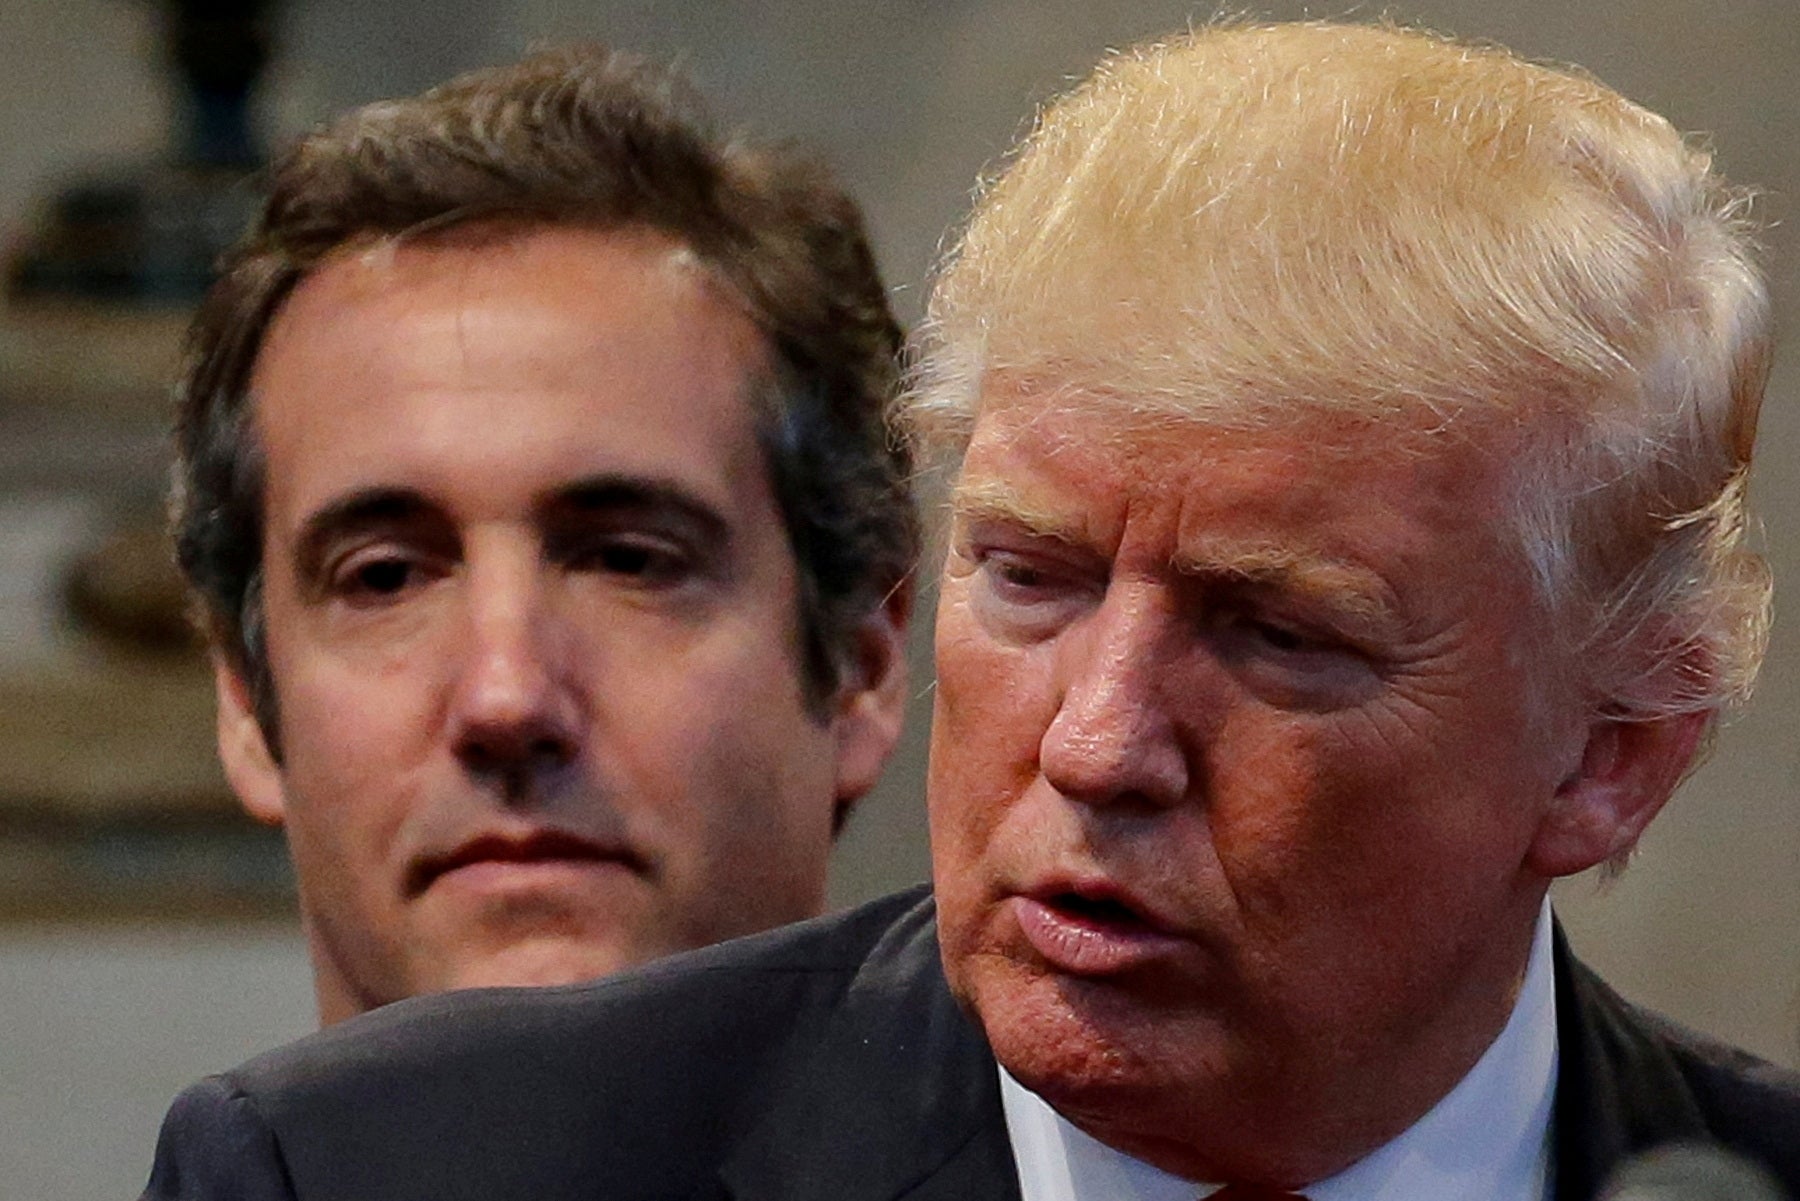 Trump and Cohen go face-to-face on Monday